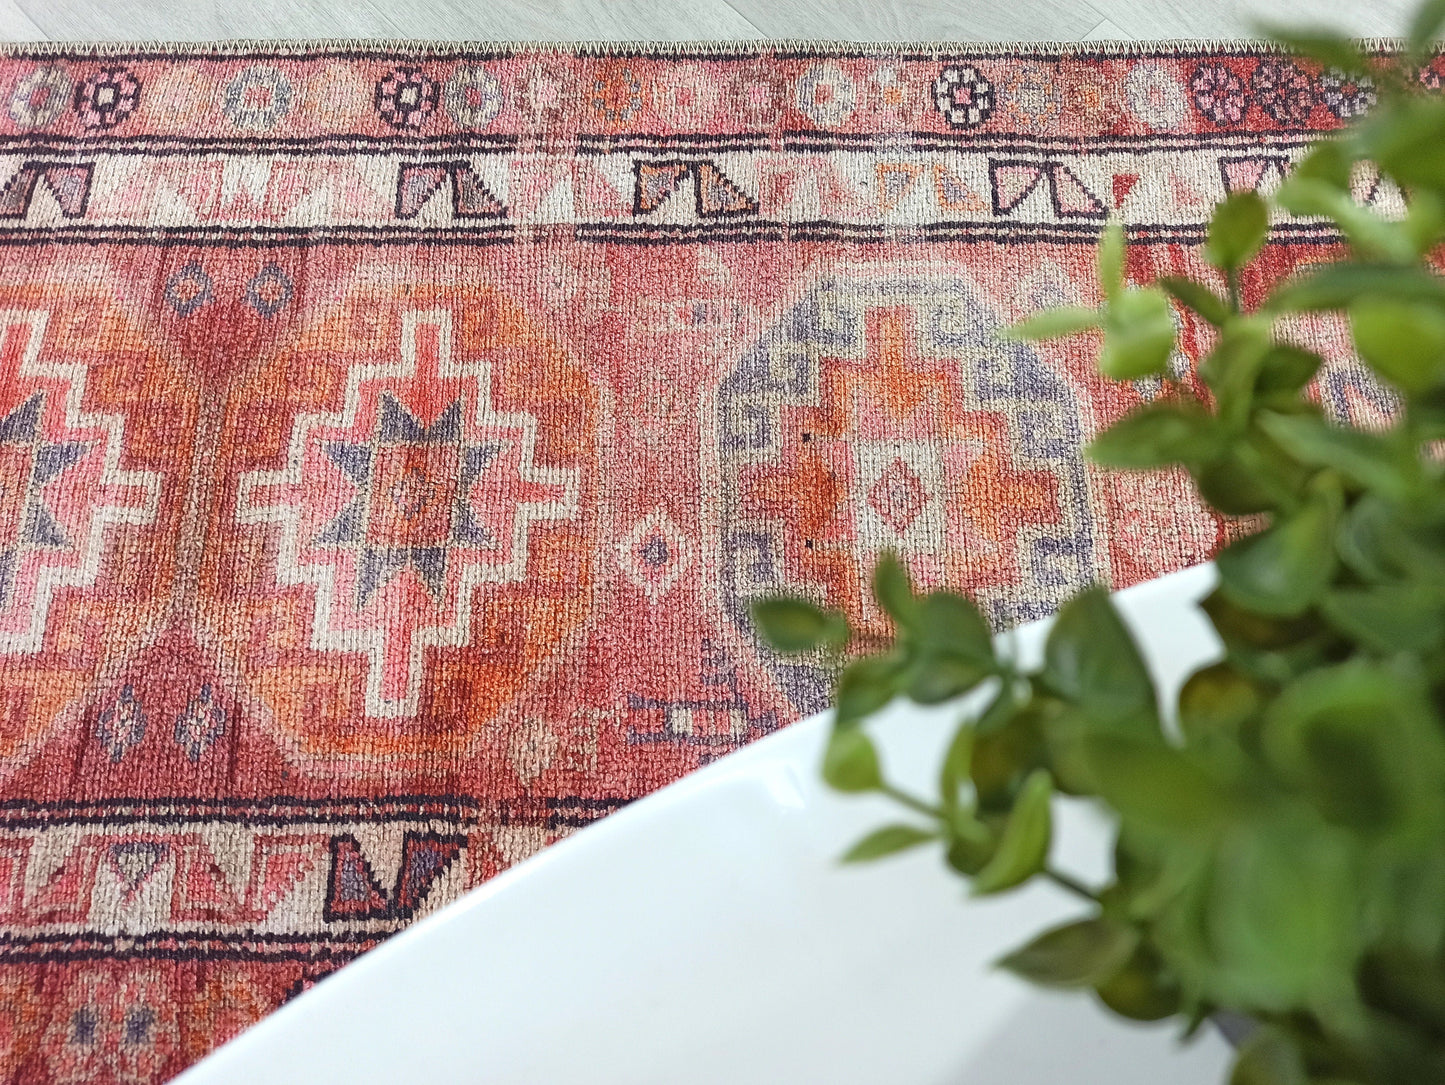 Osa Runner Turkish Coral Red Pink Runner Rug